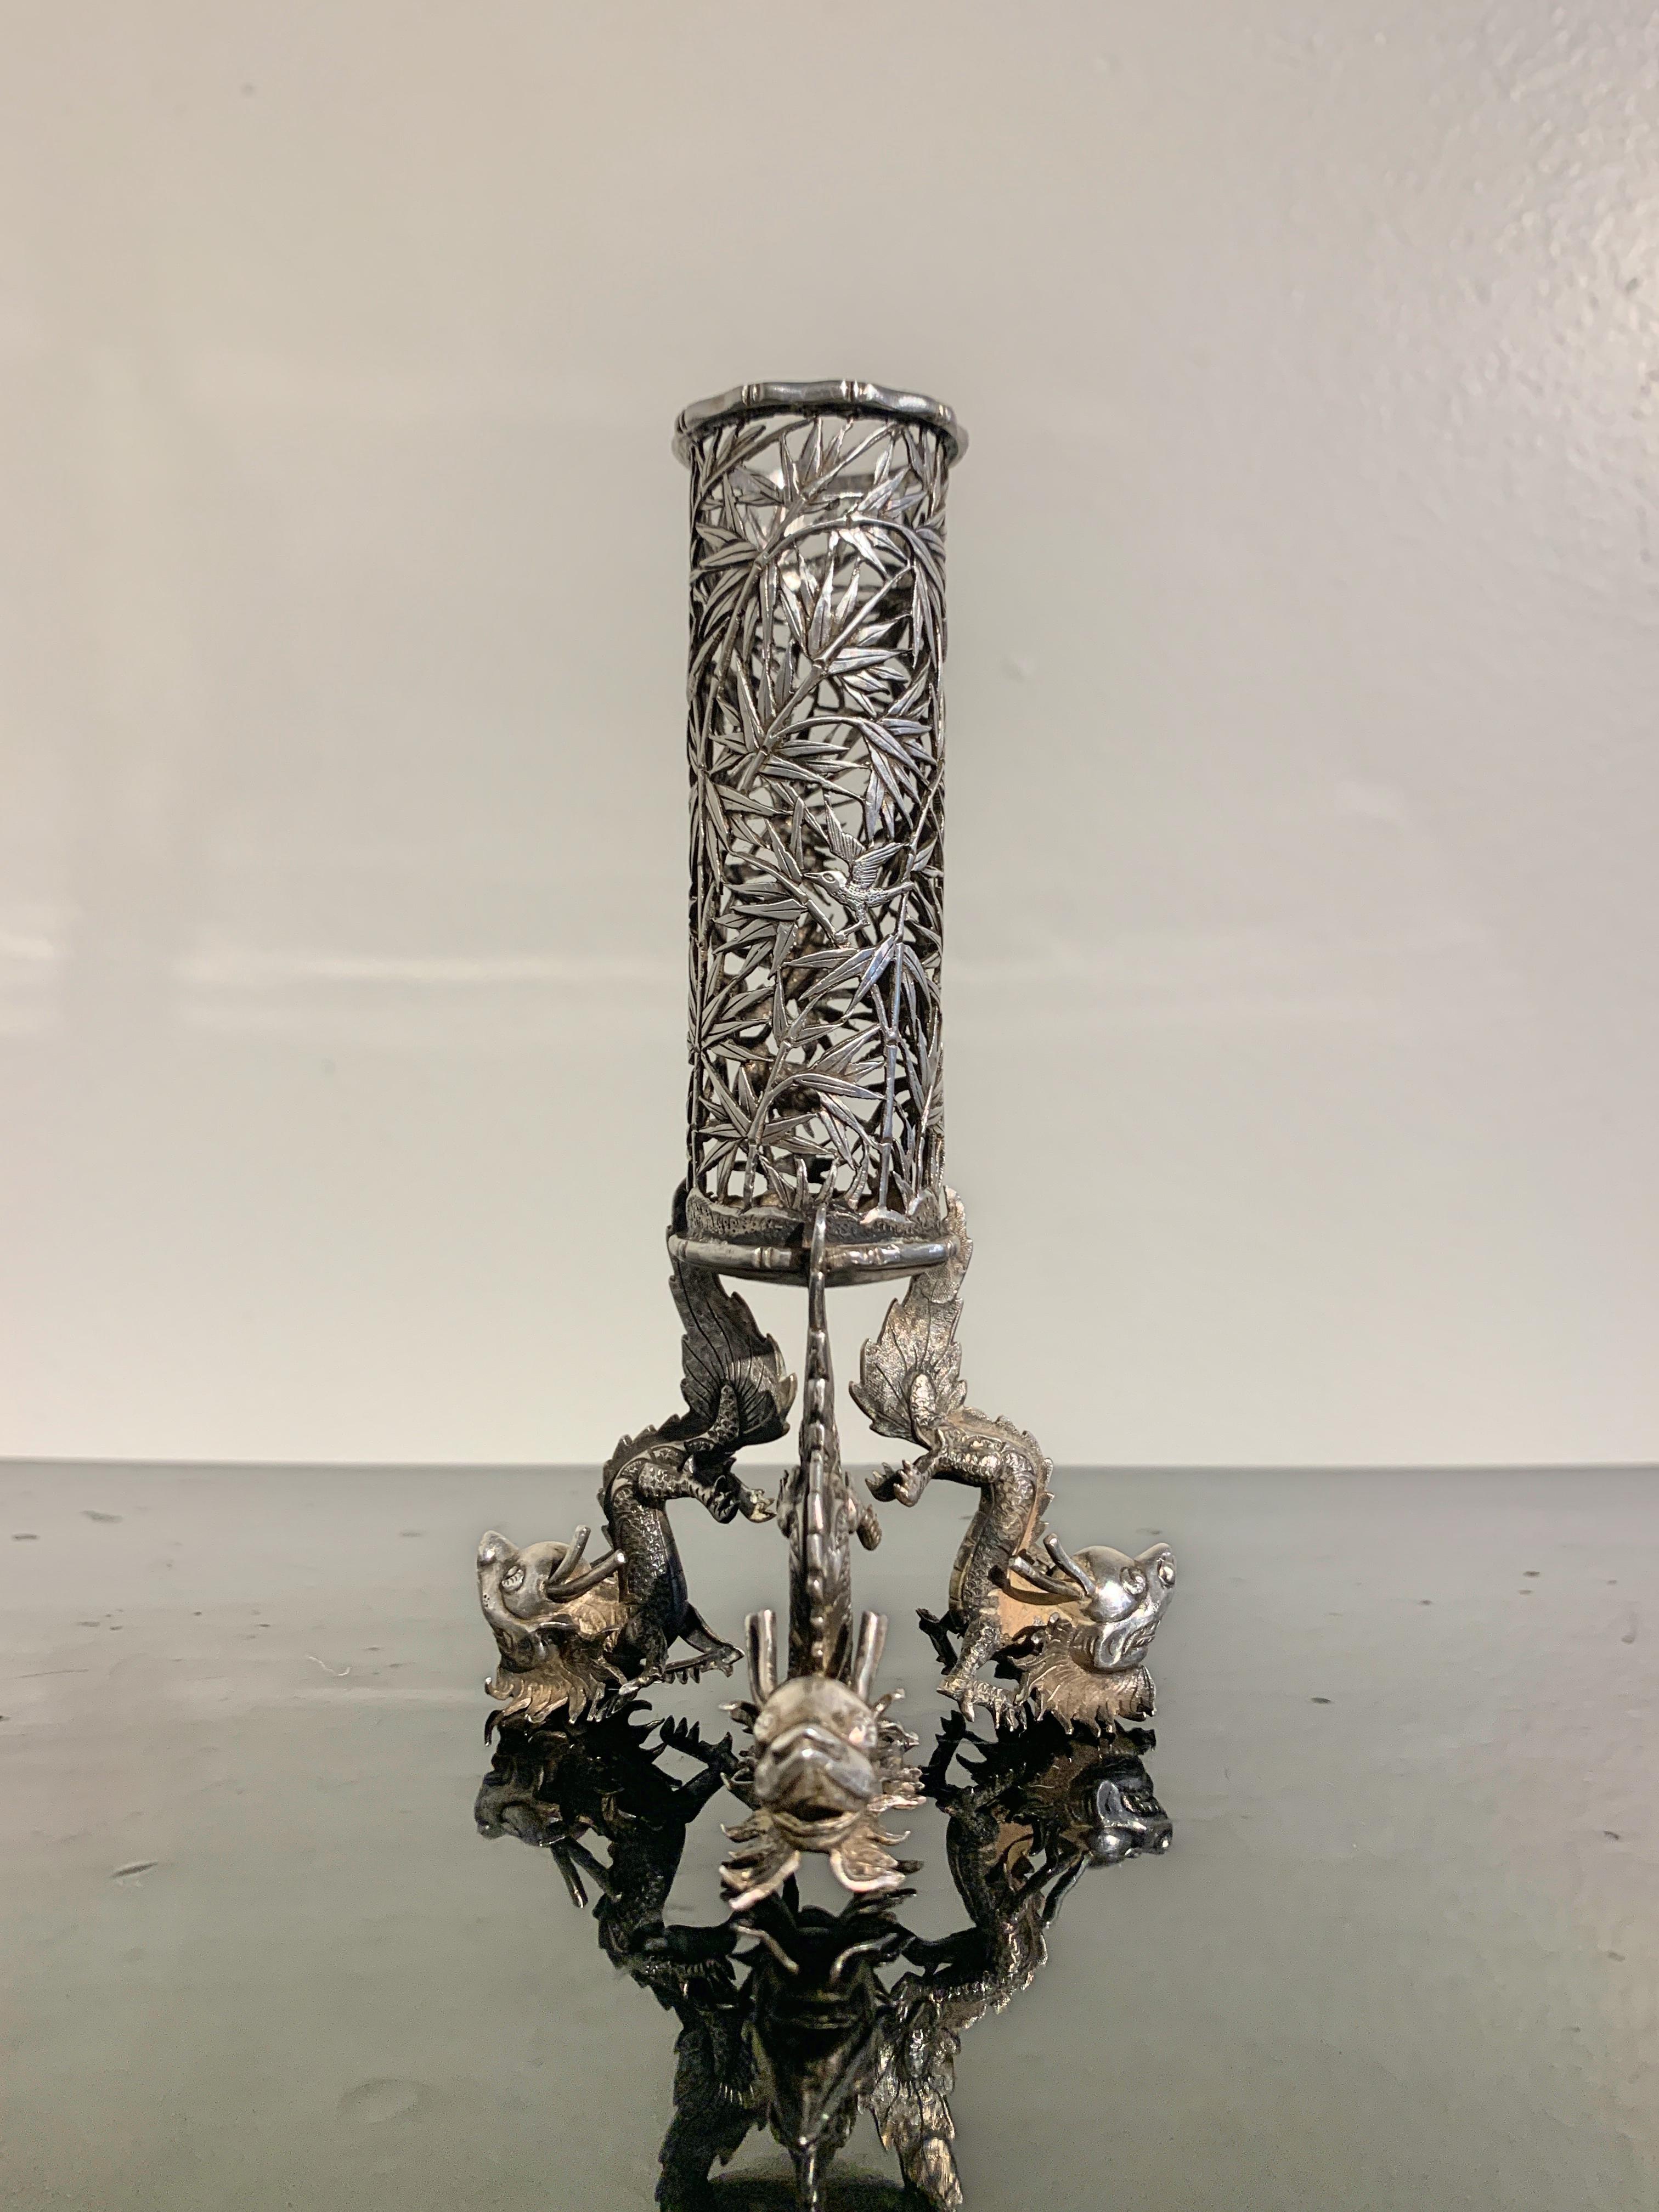 Cast Chinese Export Silver Spill or Bud Vase by Luen Wo, Early 20th Century, China